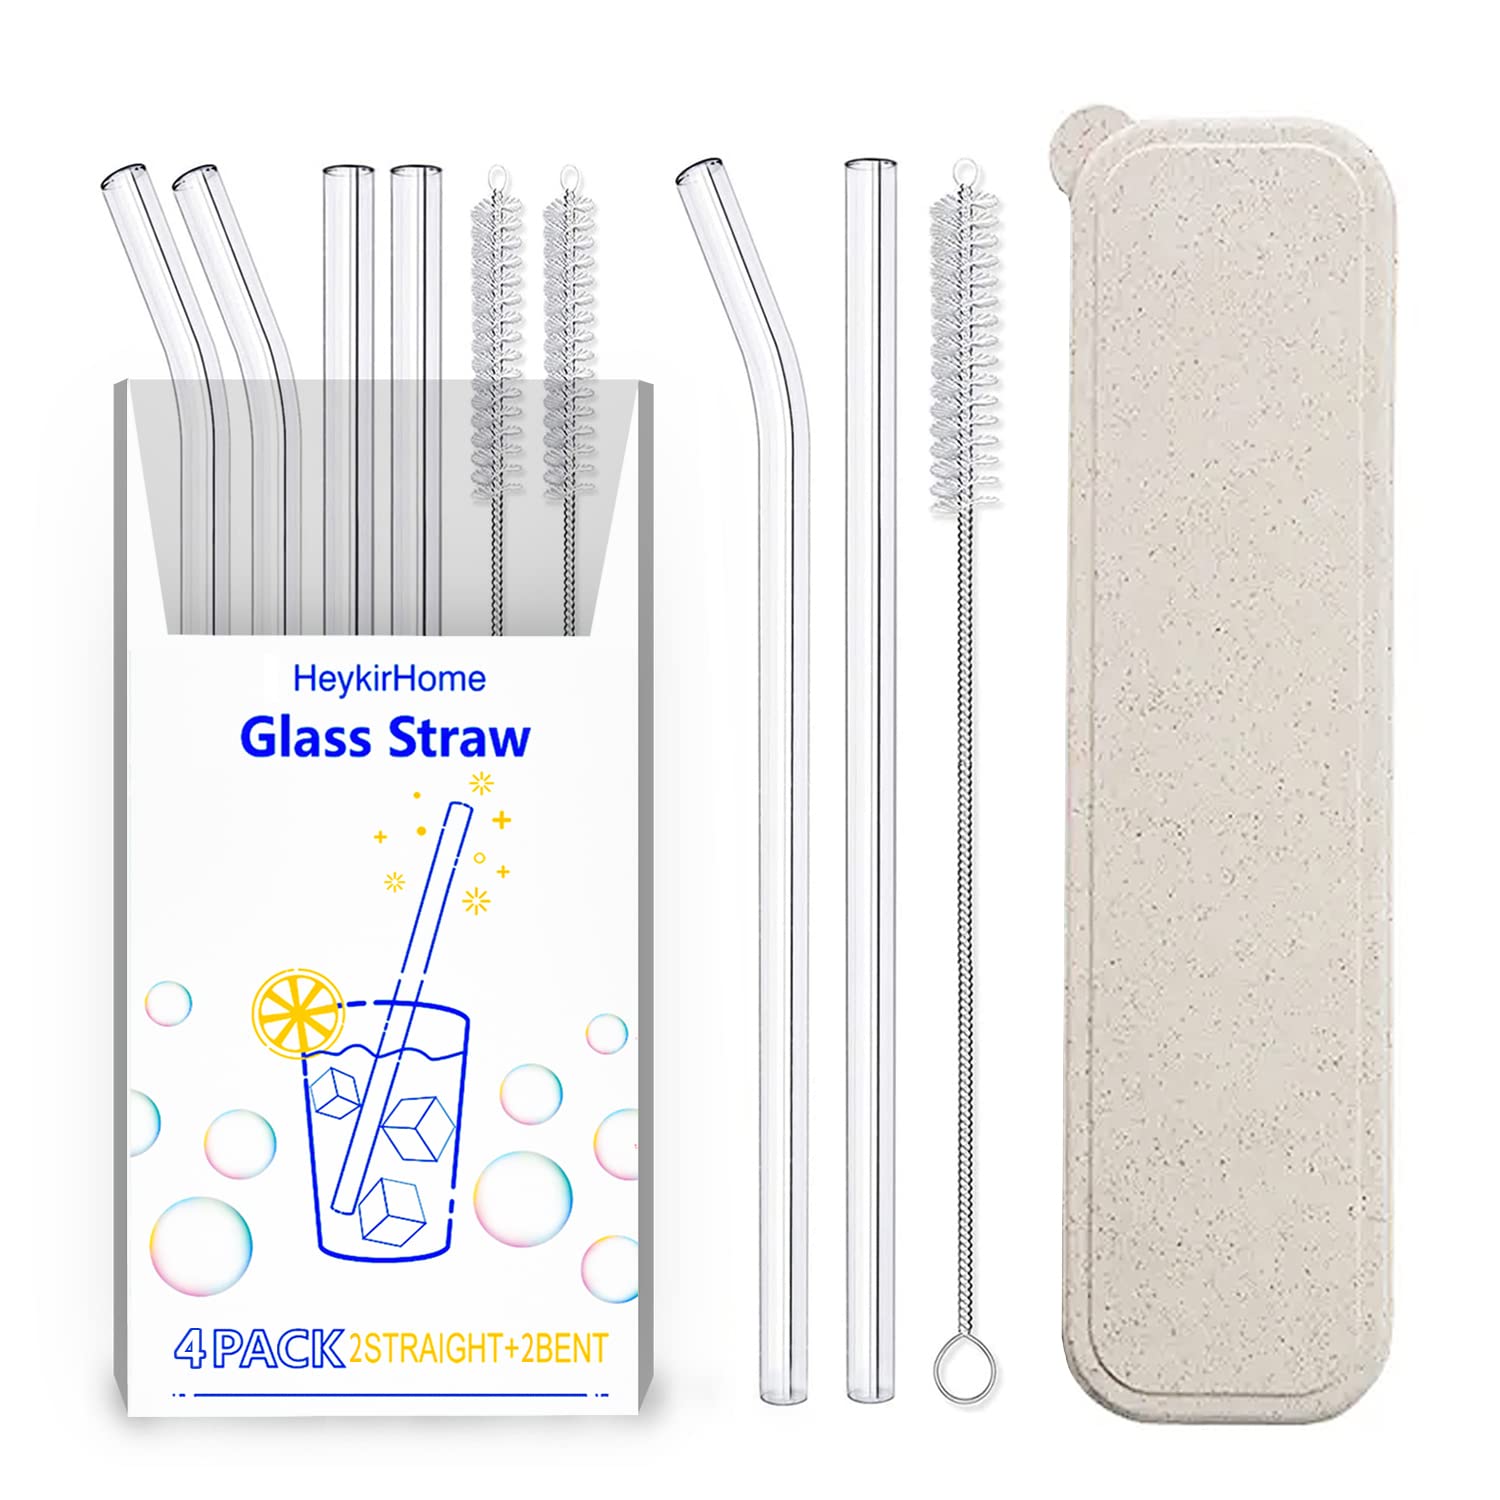 Curved Straw Tea Coffee Juice Reusable Glass Drinking Straws Cleaner Brush